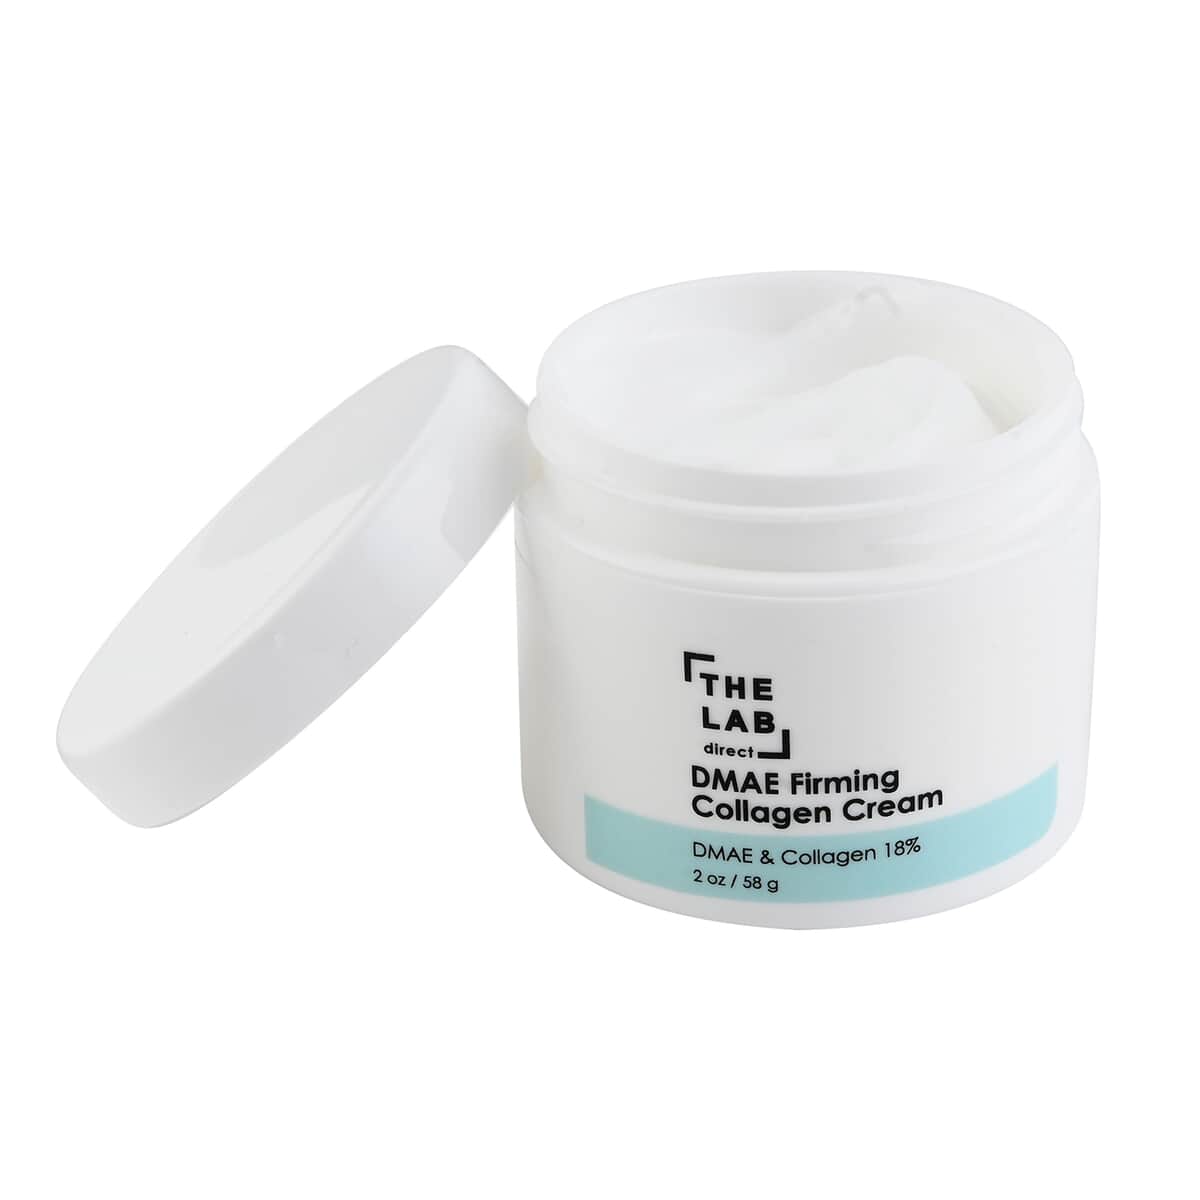 The Lab Direct DMAE Firming Collagen Cream (2 oz) image number 5